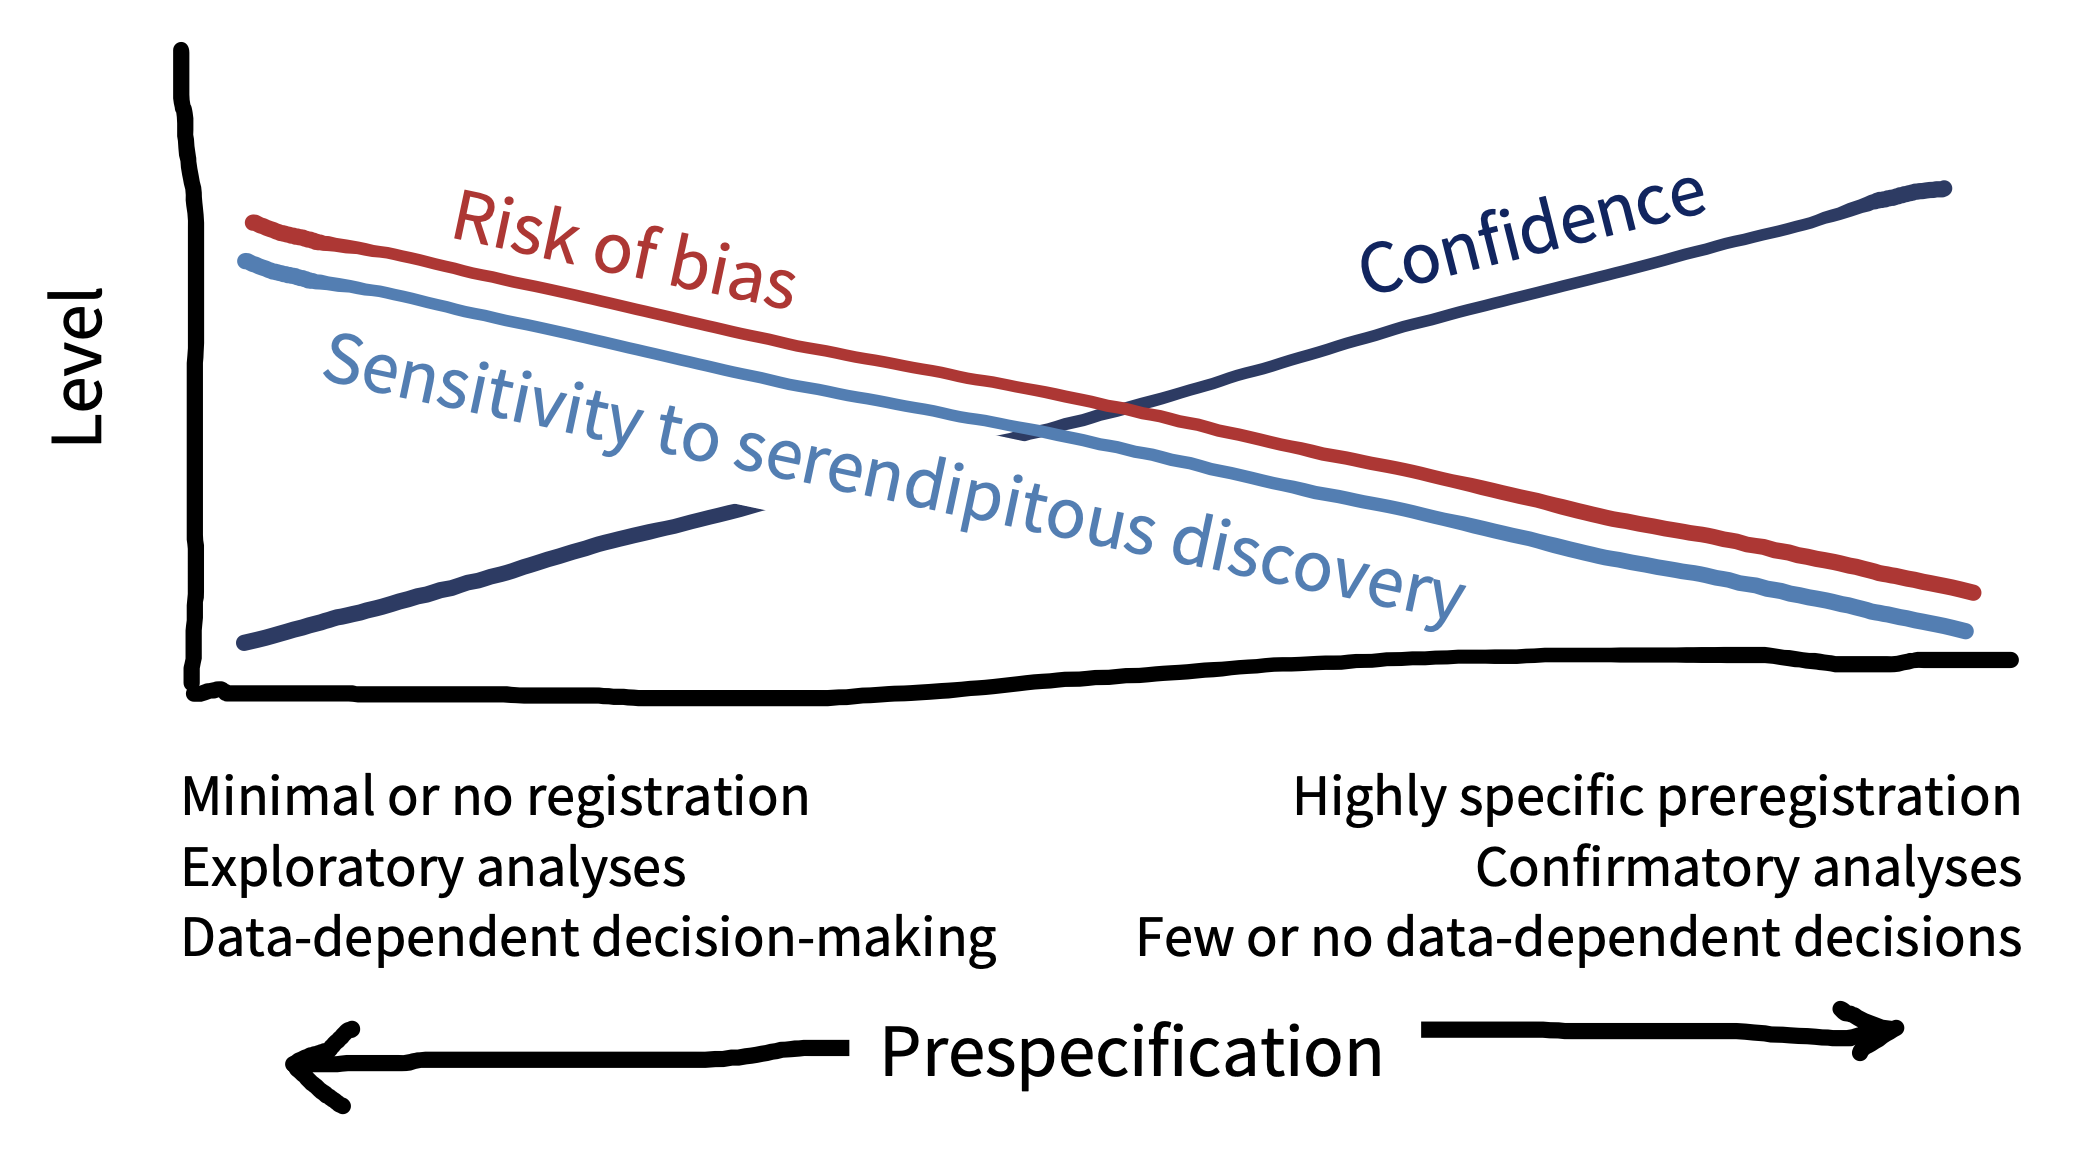 Preregistration clarifies where research activities fall on the continuum of prespecification. When the preregistration provides little constraint over researcher degrees of freedom (i.e., more exploratory research), decisions are more likely to be outcome-dependent, and consequently there is a higher risk of bias. When preregistration provides strong constraint over researcher degrees of freedom (i.e., more confirmatory research), decisions are less likely to be outcome-dependent, and consequently there is a lower risk of bias. Exploratory research activities are more sensitive to serendipitous discovery, but also have a higher risk of bias relative to confirmatory research activities. Preregistration transparently communicates where particular research outcomes are located along the continuum, helping readers to appropriately calibrate their confidence. 